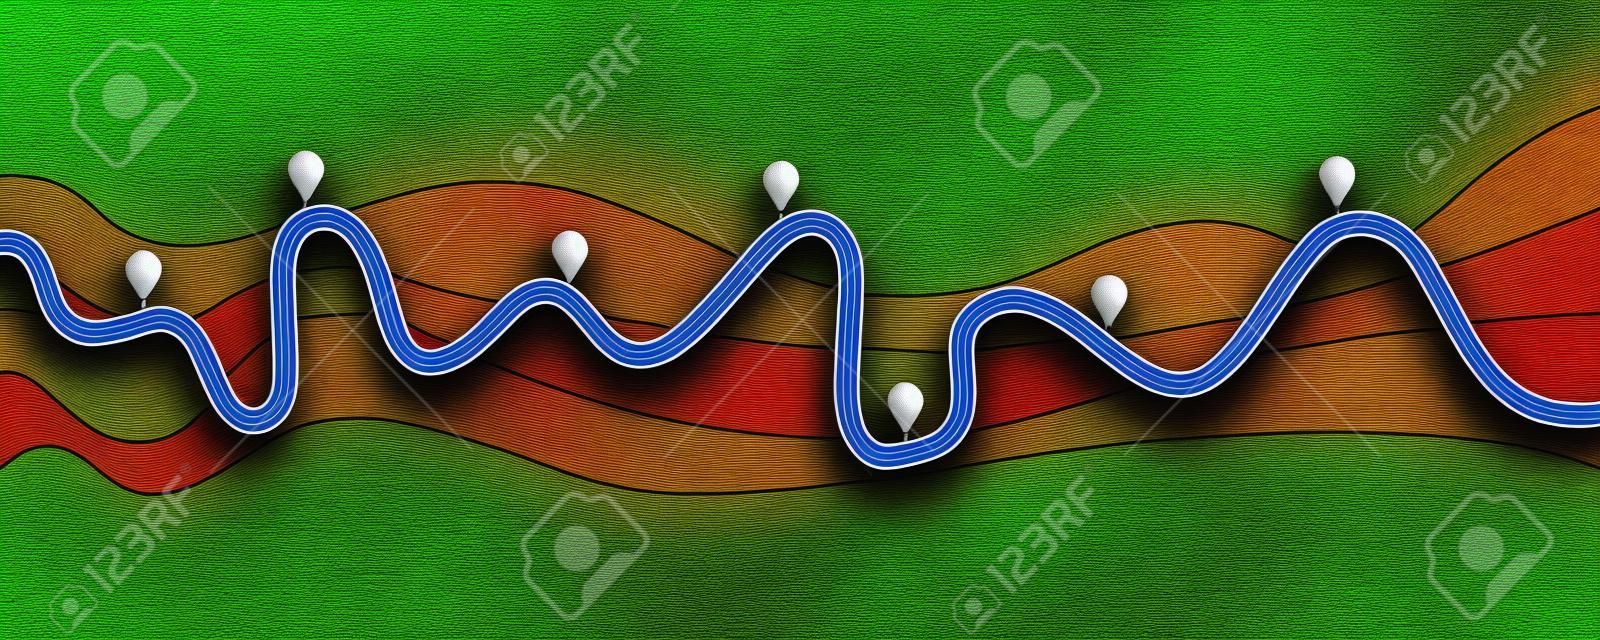 Road trip and Journey route. Winding Road on a Colorful Background with pin pointer.